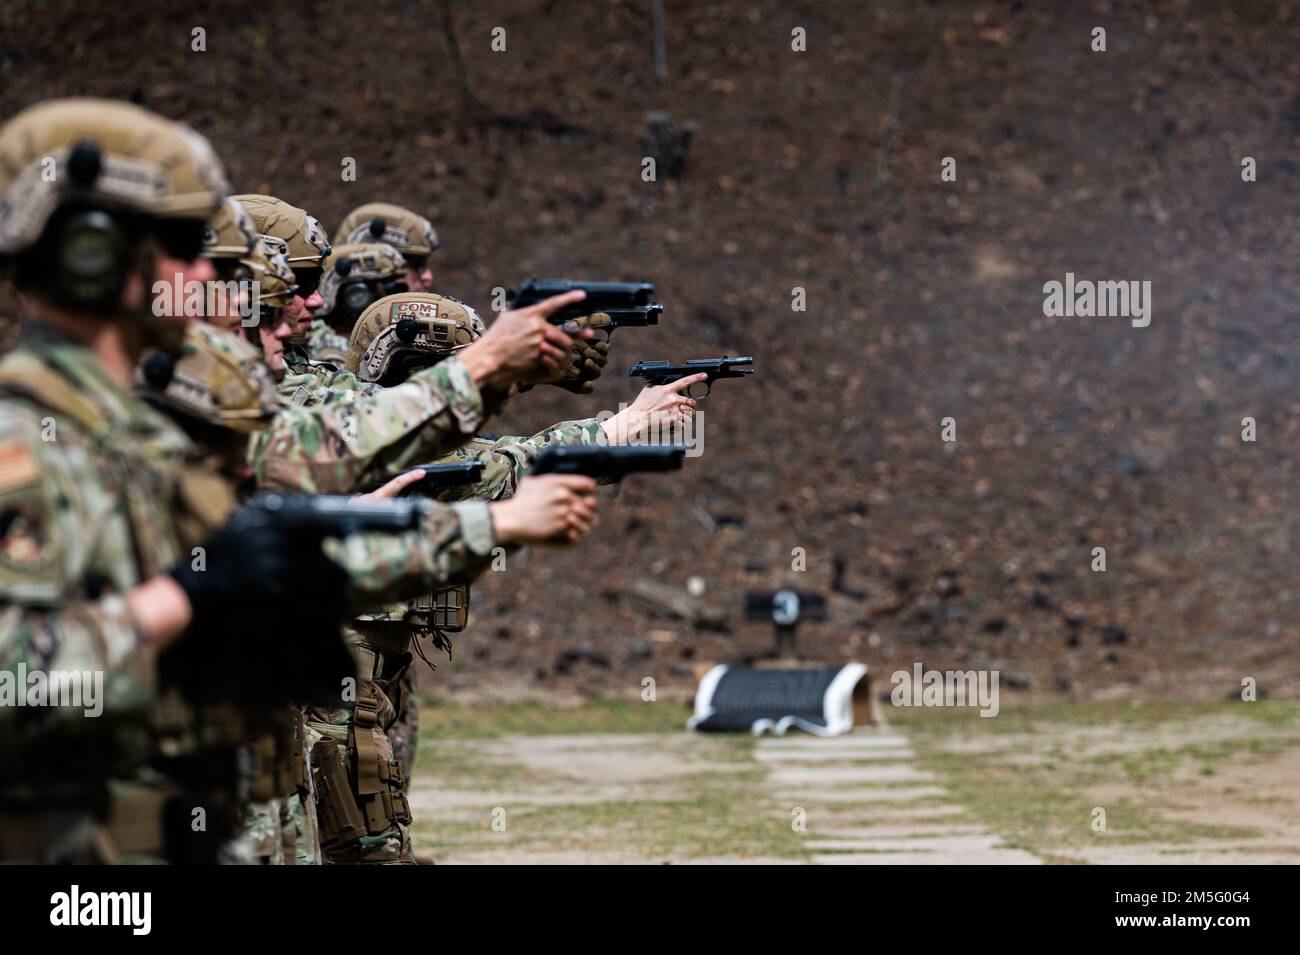 U.S. Air Force Airmen practice firing M9 pistols during exercise Scorpion Lens at Charleston, South Carolina, March 15, 2022. The 1st Combat Camera Squadron (1CTCS) holds Exercise Scorpion Lens annually to provide expeditionary skills training to Combat Camera Airmen. Stock Photo